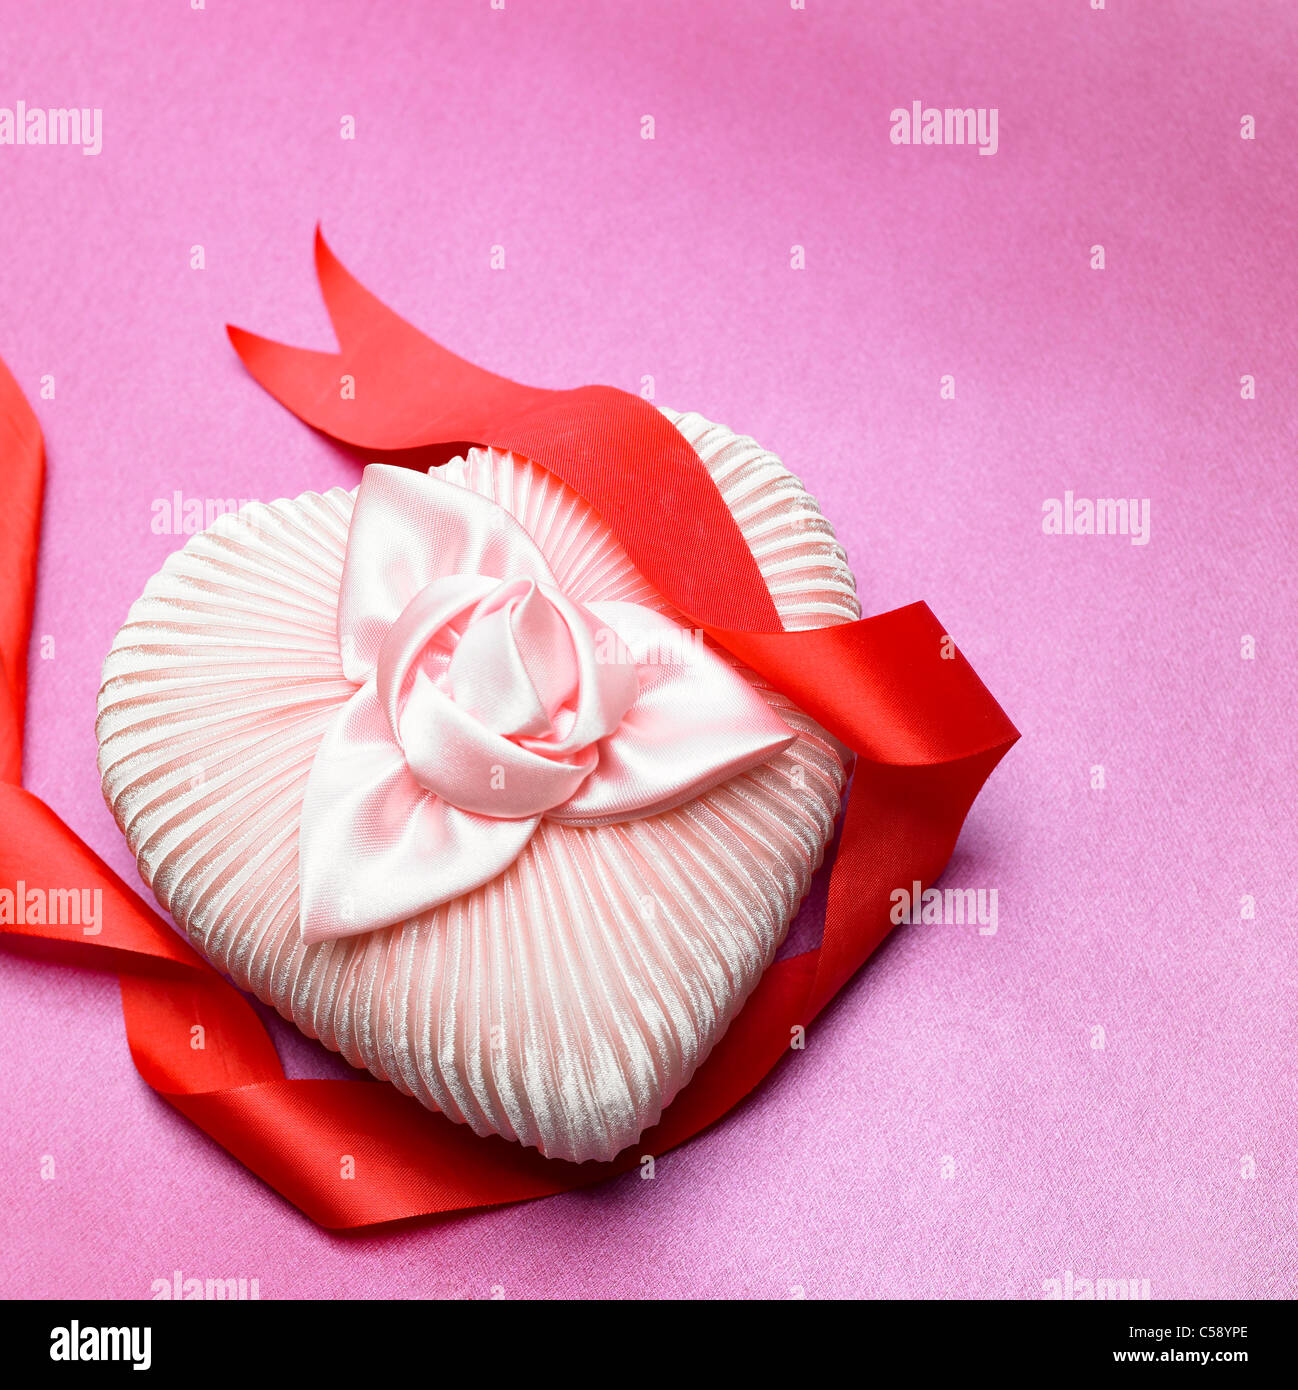 Close-up of Heart shape gift Stock Photo